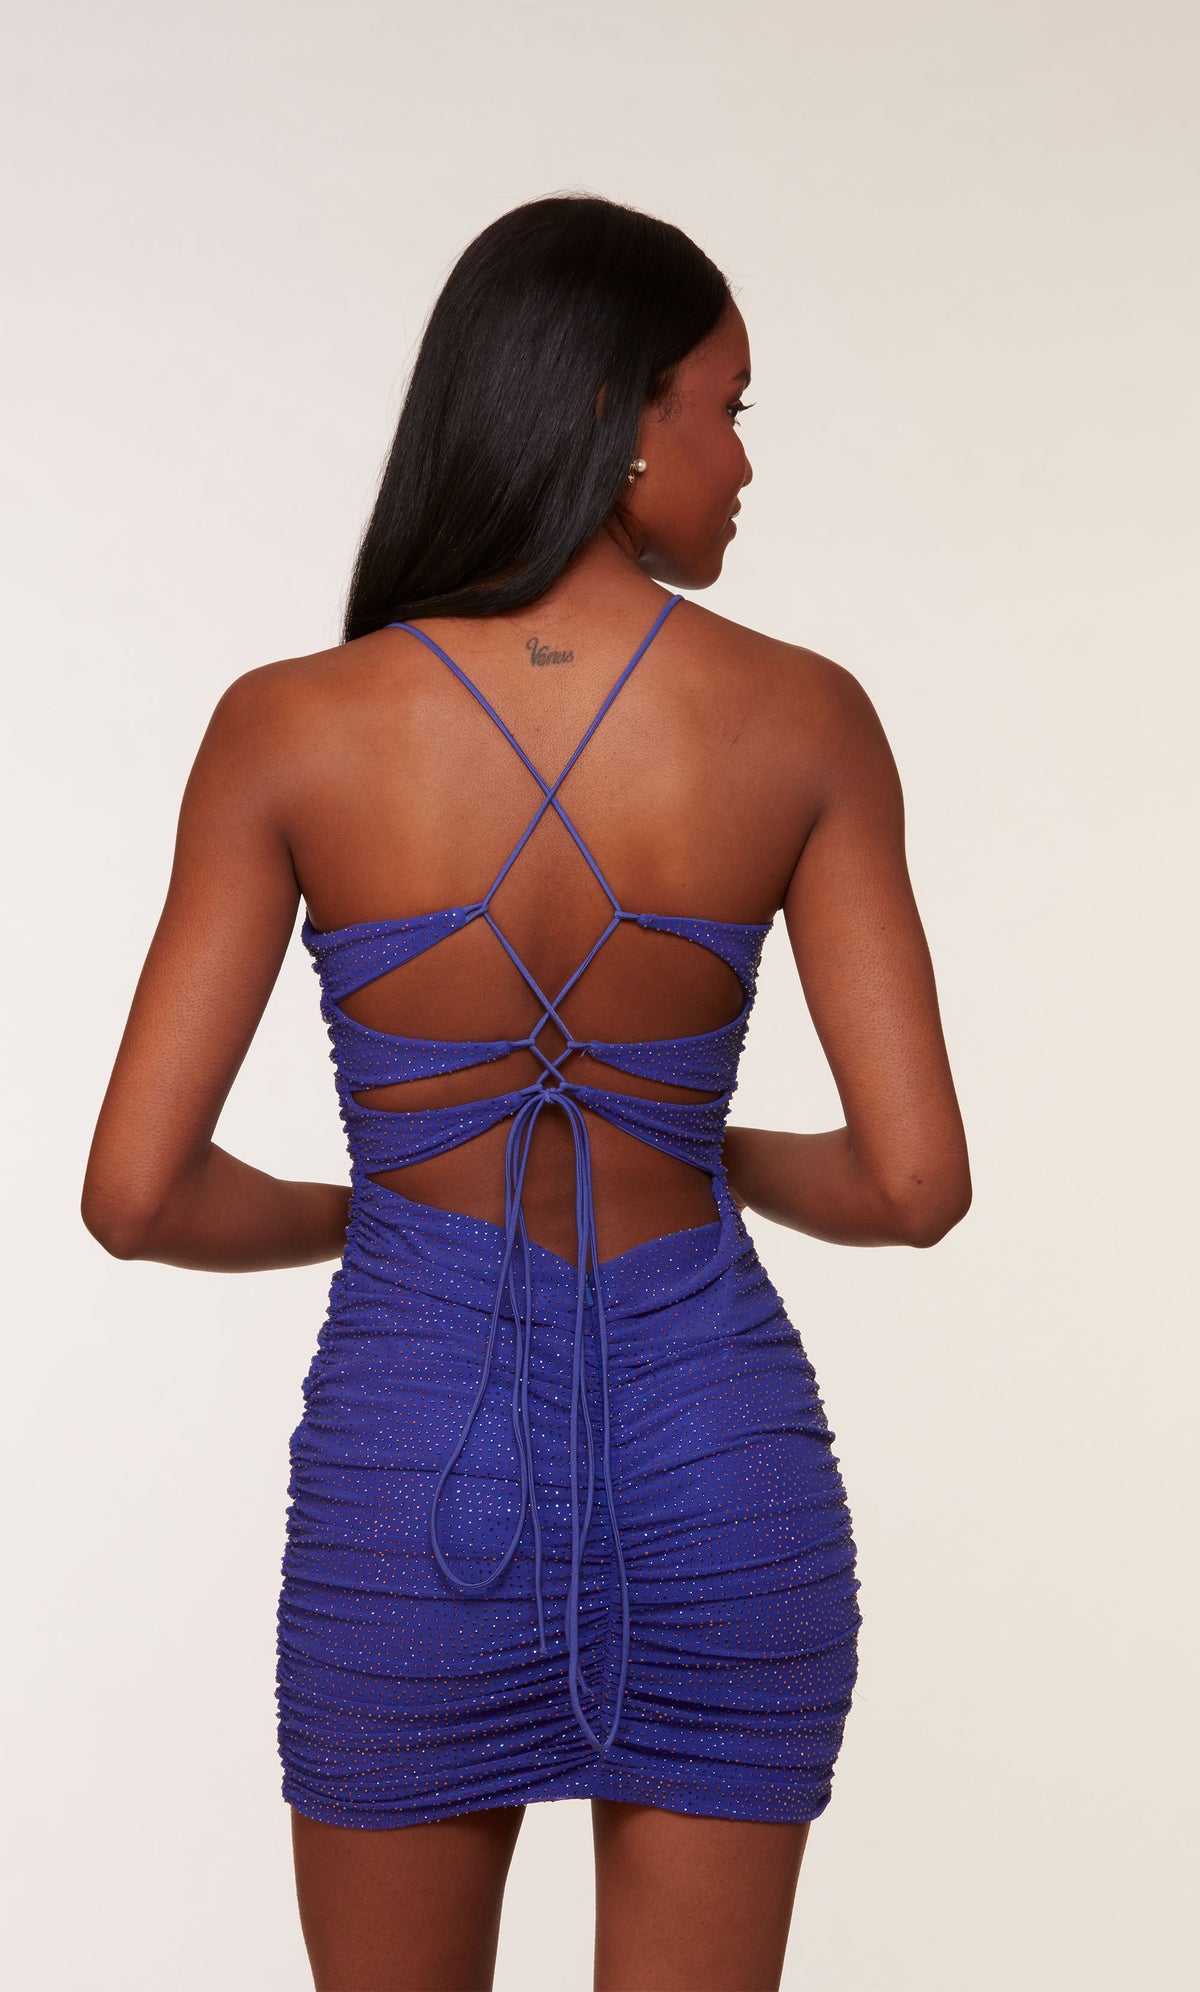 A short, mesh homecoming dress with a V-neckline and ruching detail. The back of the dress has a lace-up back closure for the perfect fit.